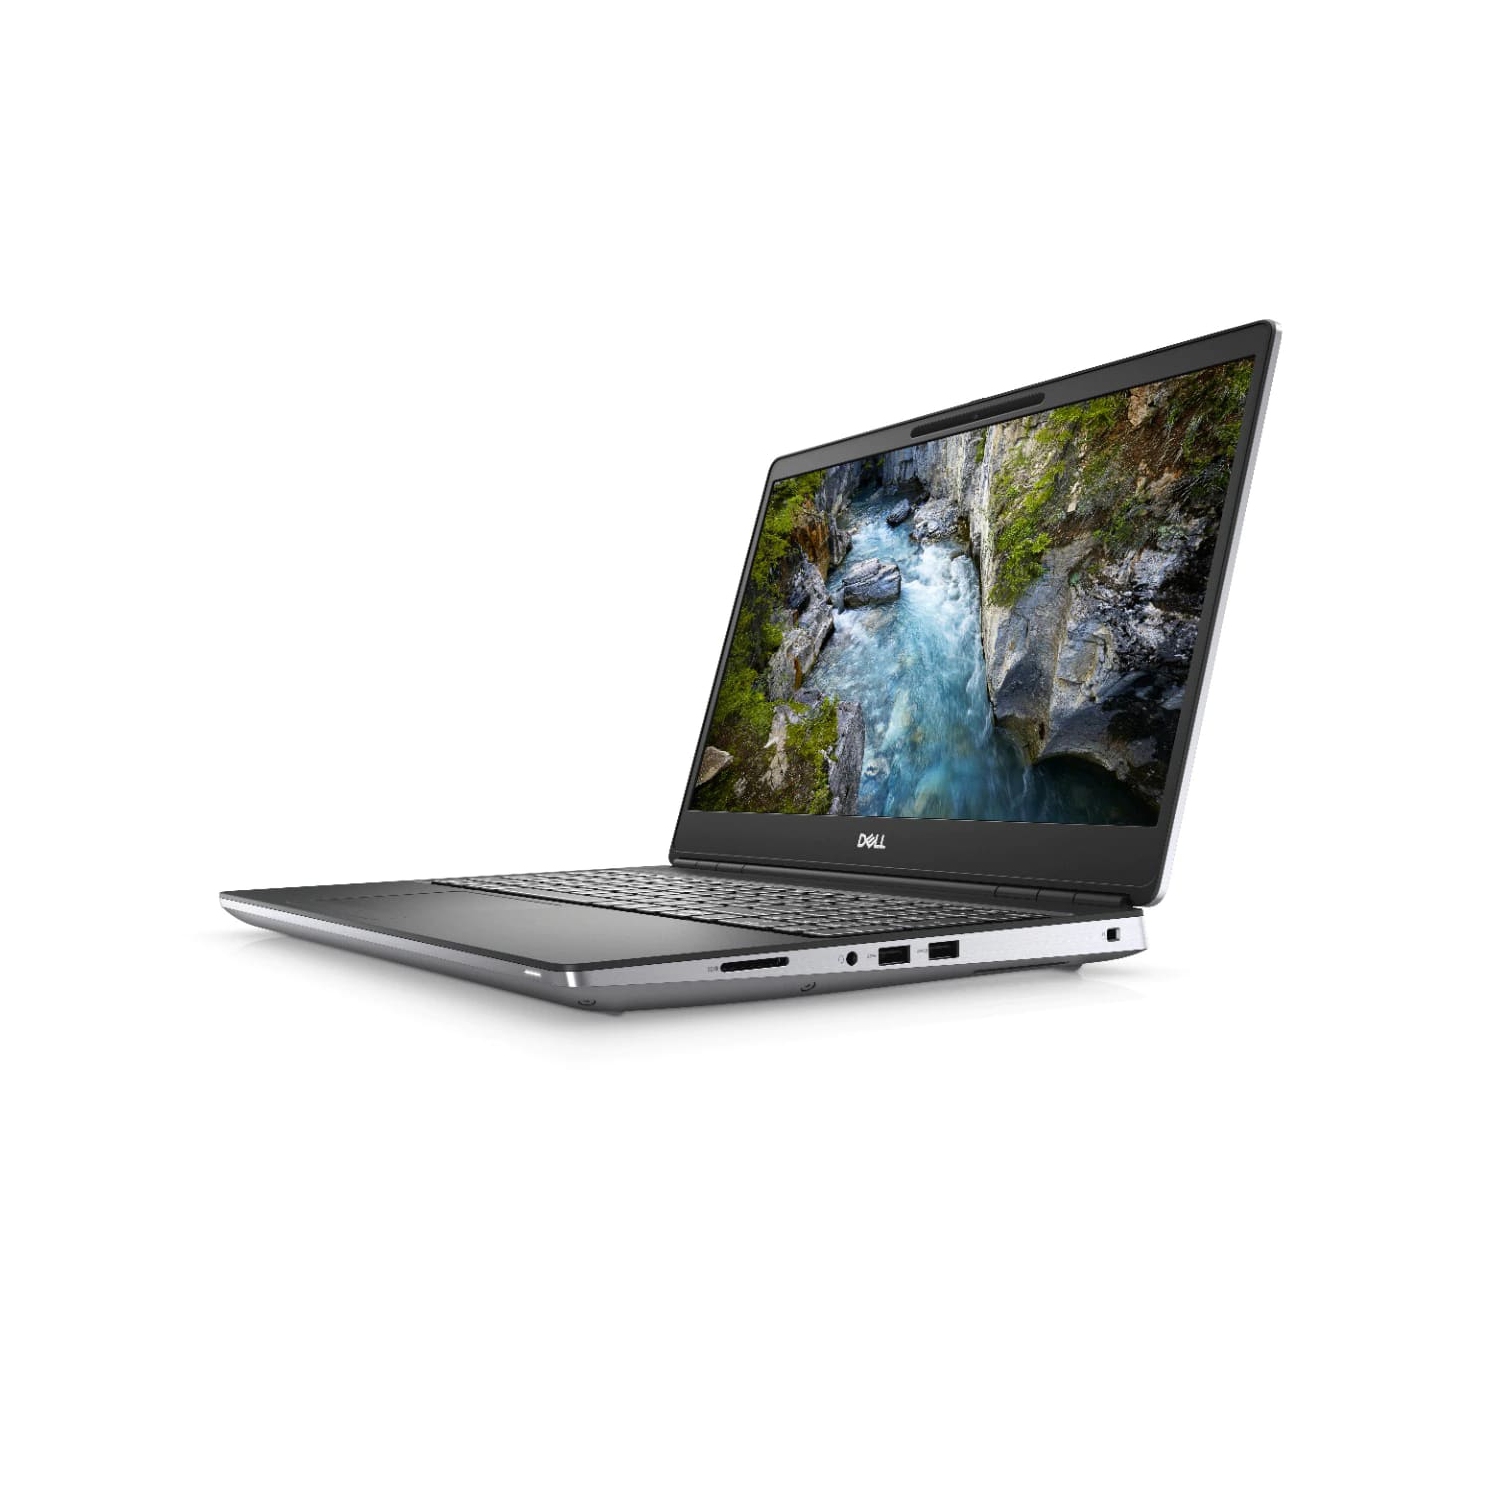 Refurbished (Excellent) – Dell Precision 7000 7550 Workstation Laptop (2020) | 15.6" FHD | Core i7 - 2TB SSD - 128GB RAM - RTX 5000 | 8 Cores @ 5.1 GHz - 10th Gen CPU - 16GB GDDR6